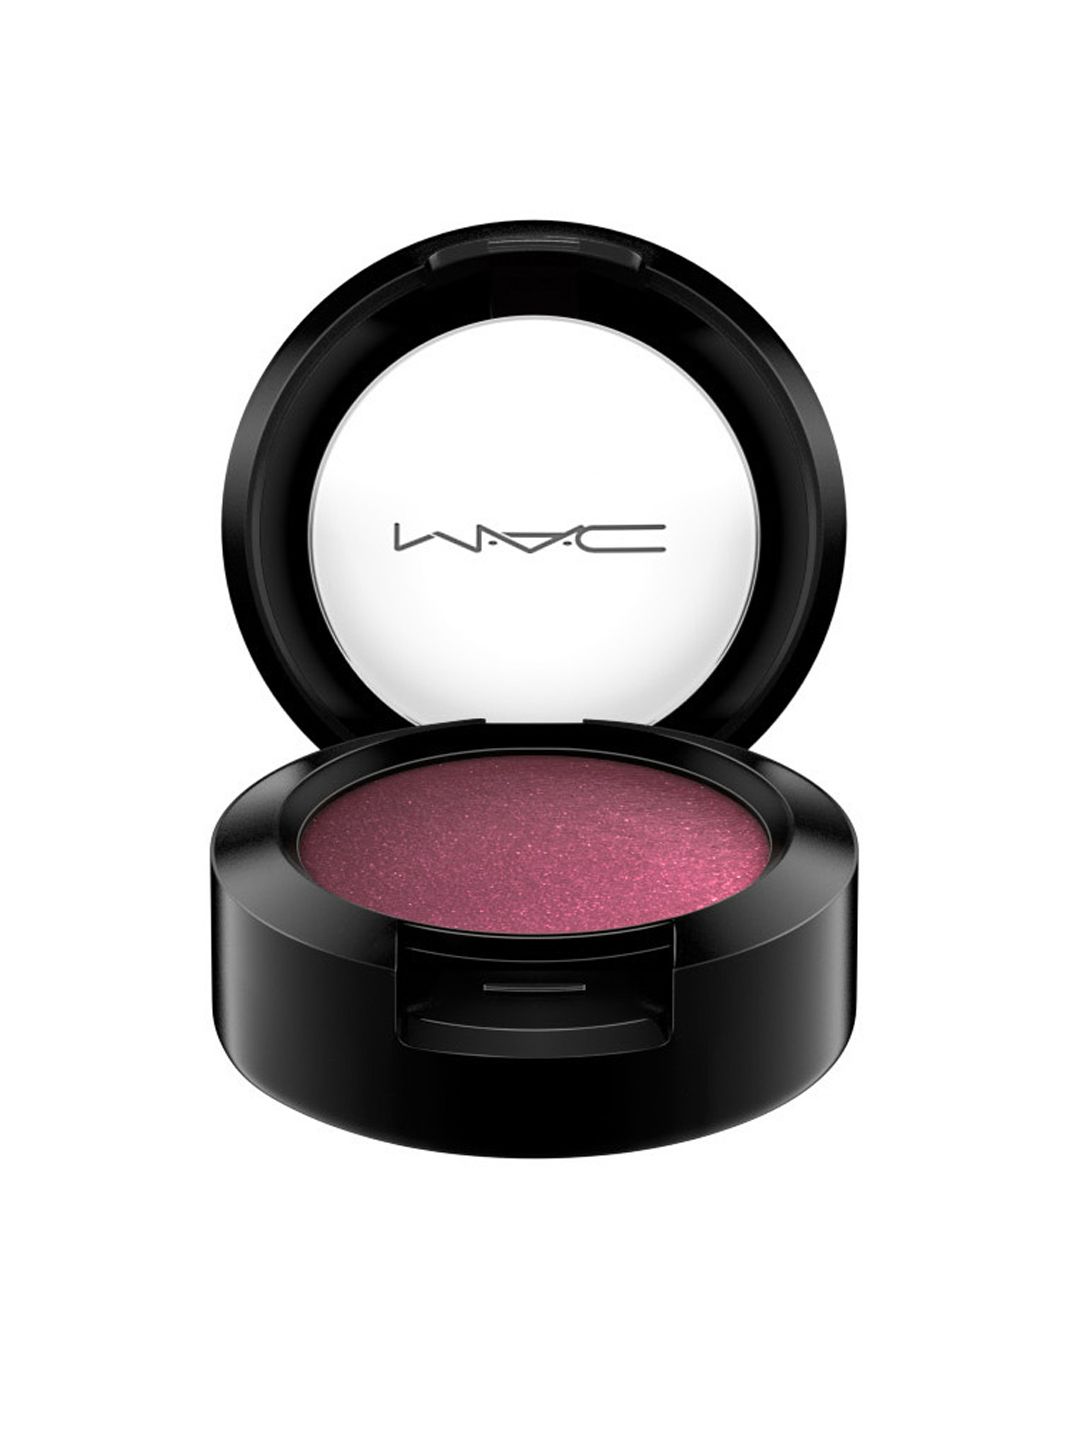 M.A.C Eye Shadow Frost - Cranberry 1.5 g Price in India